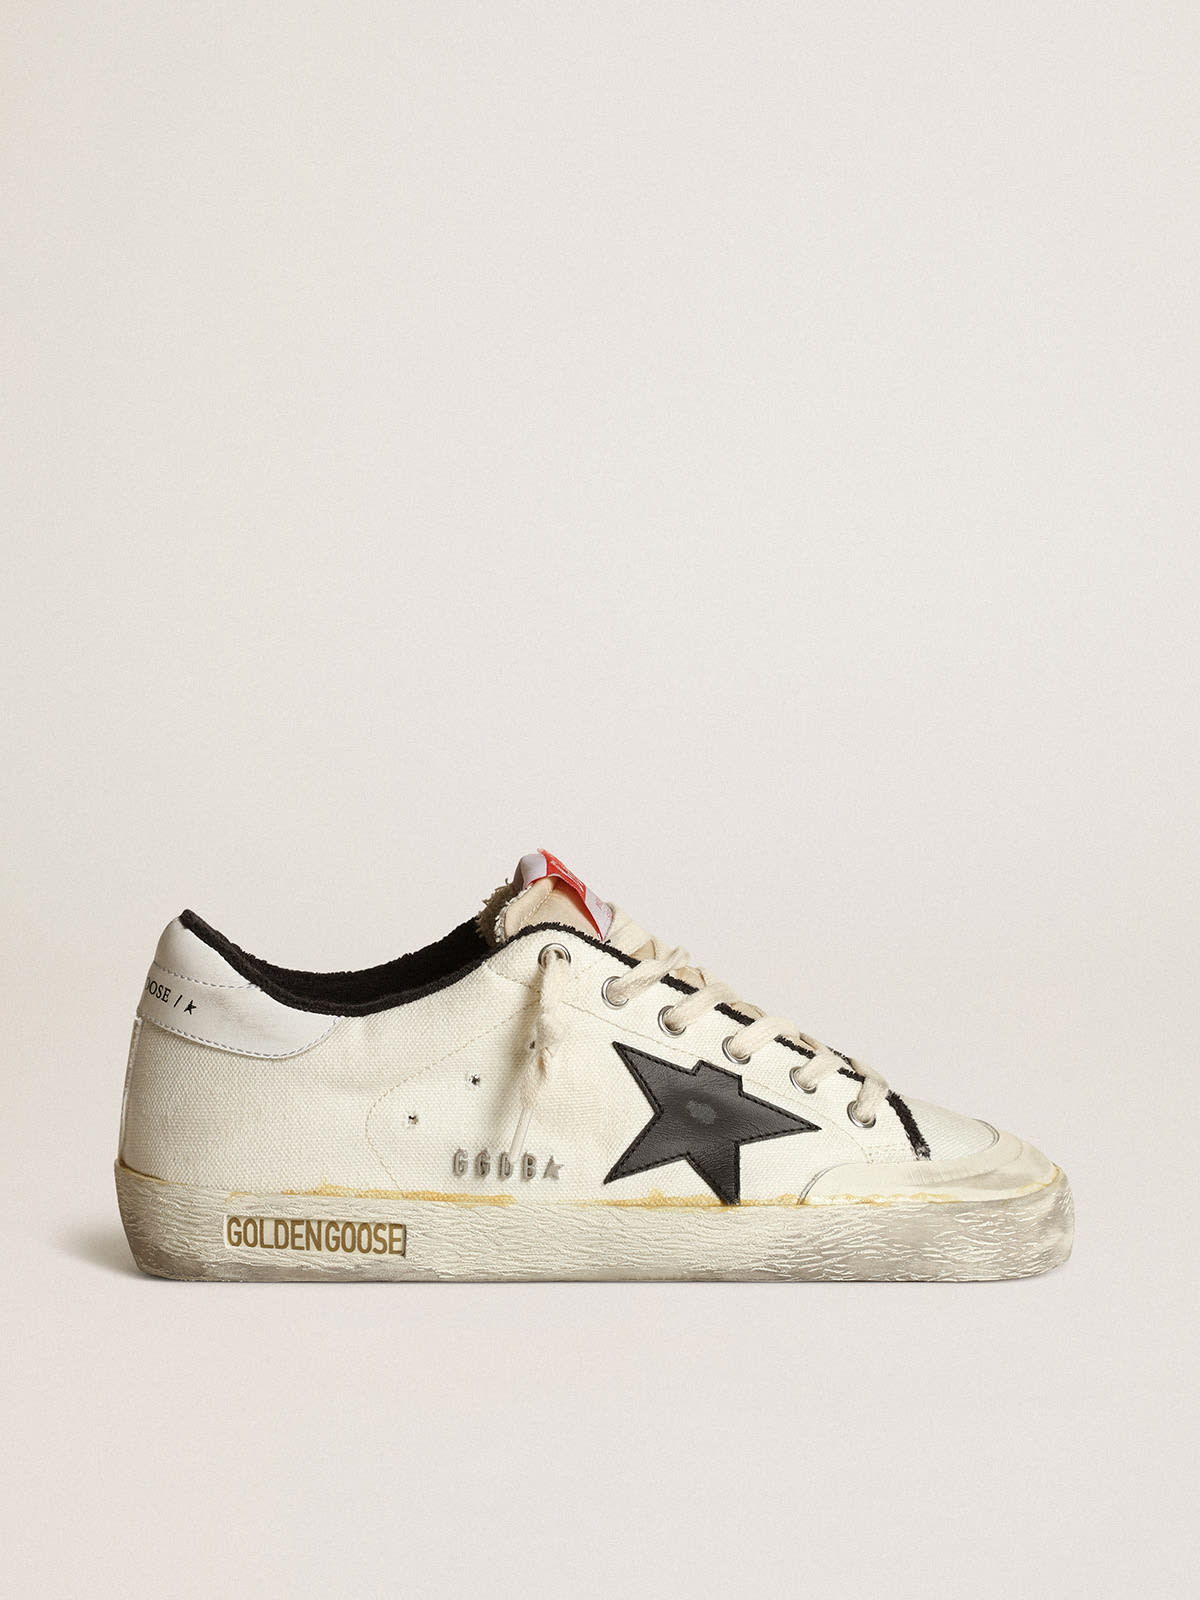 Sneakers Uomo Golden Goose Women’s Super-Star LTD sneakers in beige canvas with black leather star and white leather heel tab